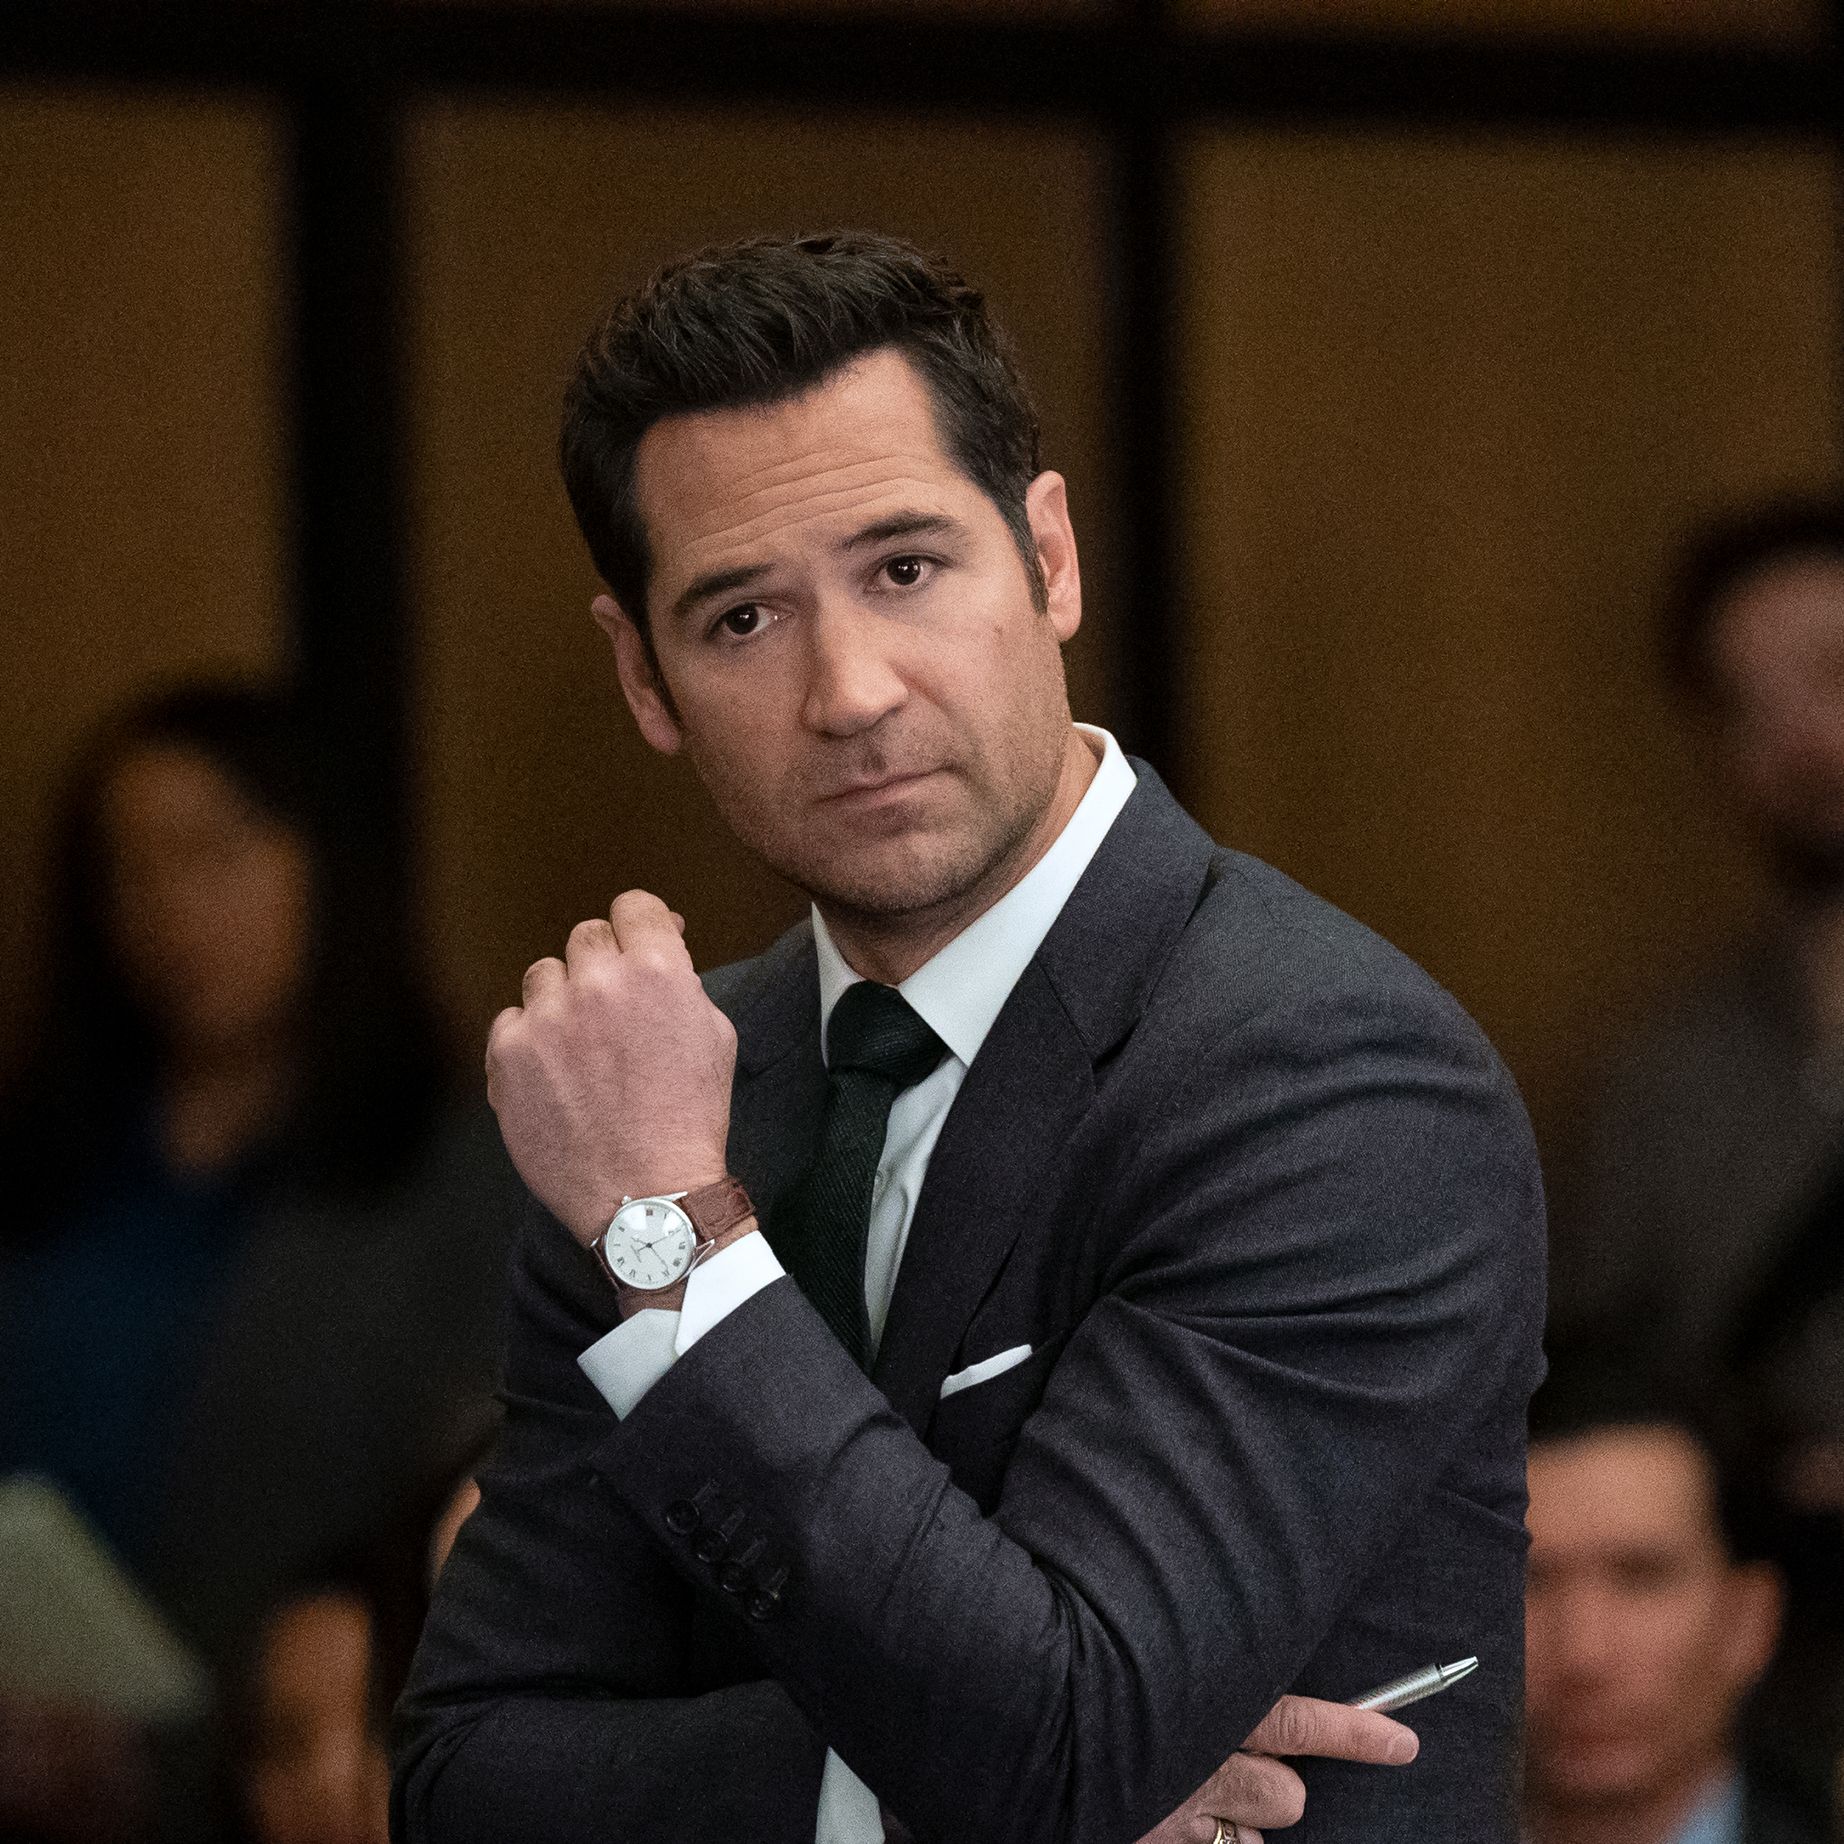 Will We See Mickey Take On Another Case in 'The Lincoln Lawyer' Season 3?